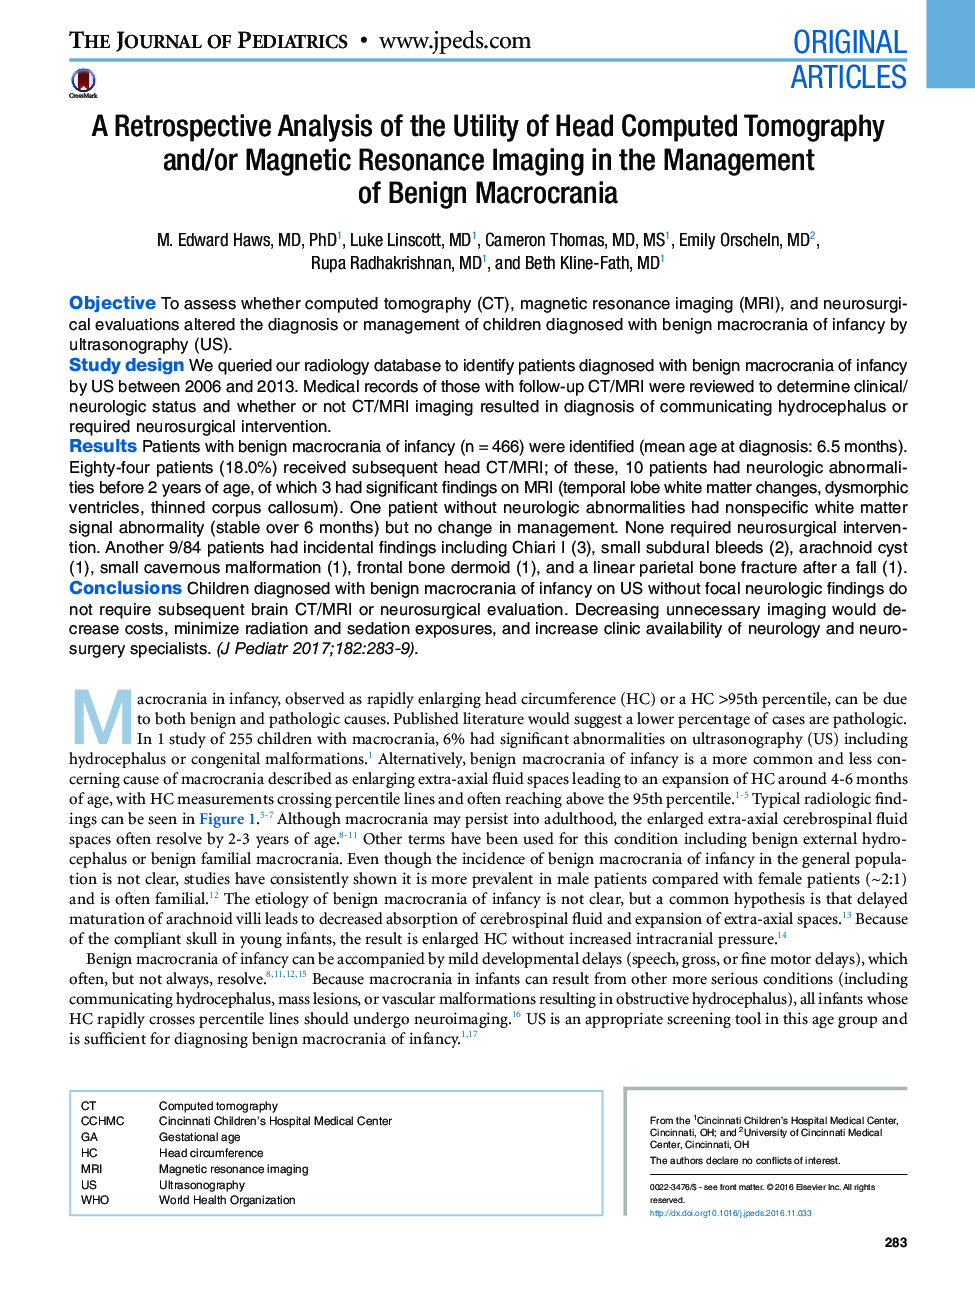 Original ArticlesA Retrospective Analysis of the Utility of Head Computed Tomography and/or Magnetic Resonance Imaging in the Management of Benign Macrocrania